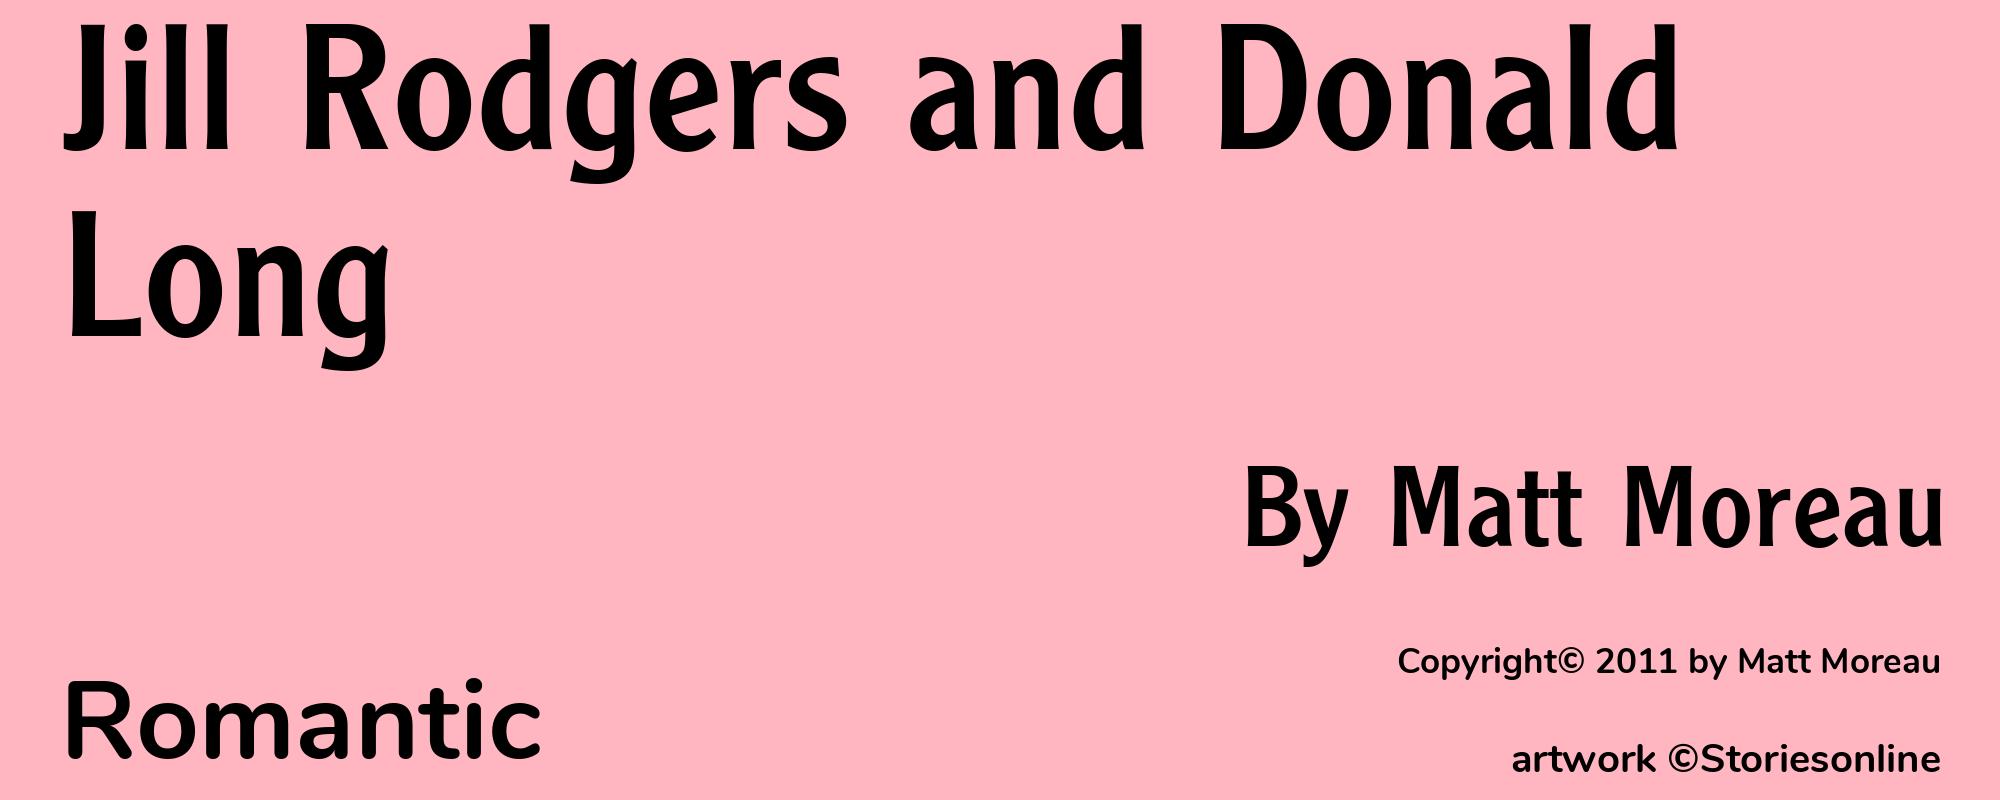 Jill Rodgers and Donald Long - Cover